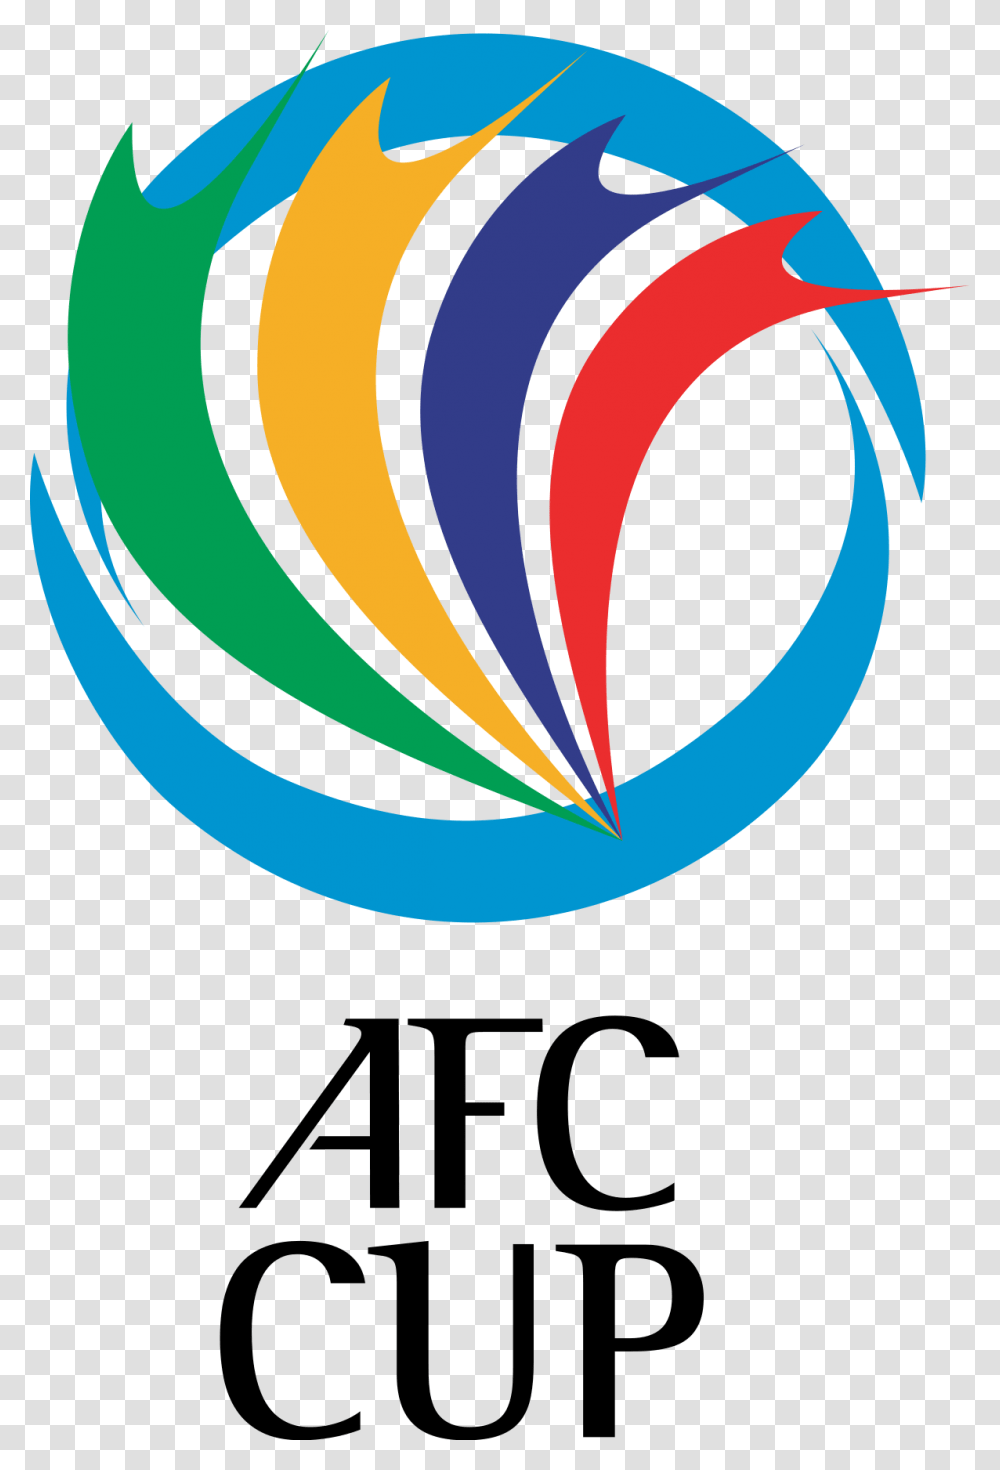 Uefa Champions League Trophy Afc Cup 2019 Logo, Ball, Balloon, Outdoors Transparent Png